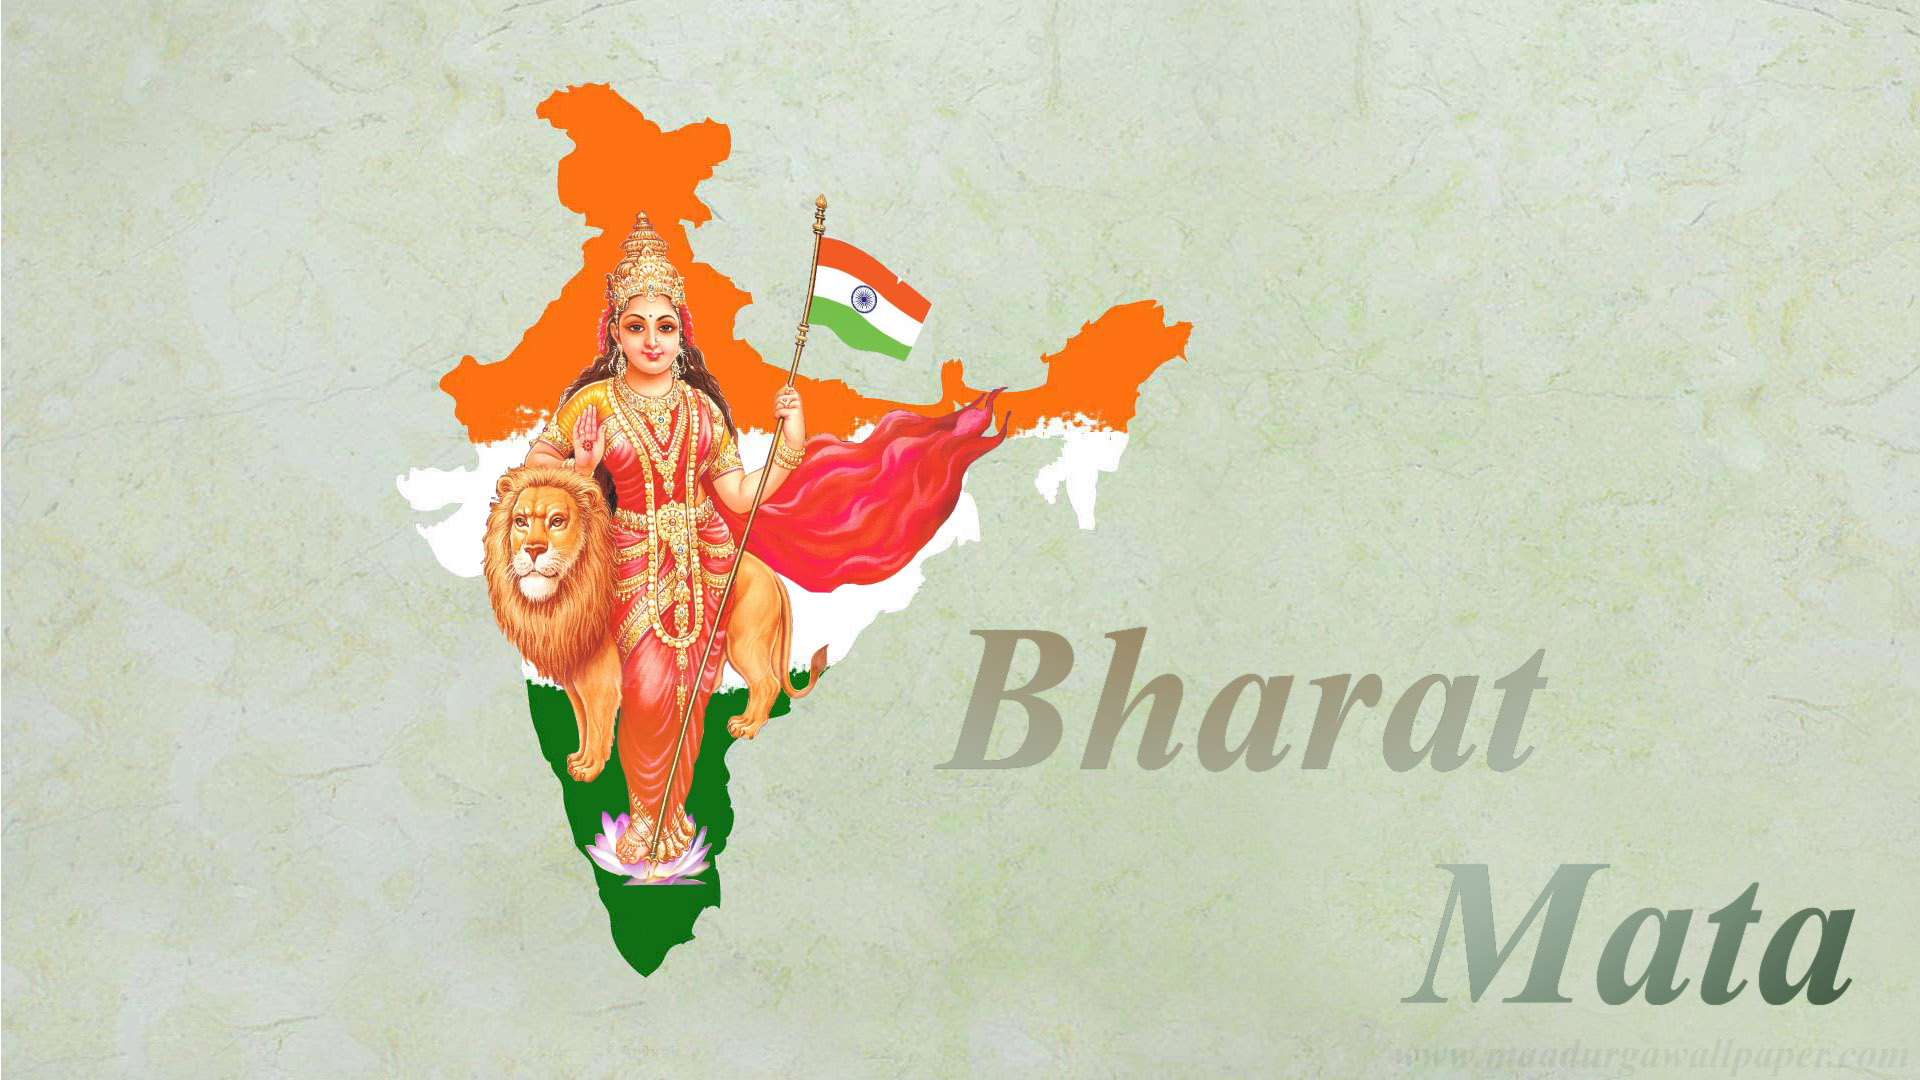 Akhand Bharat Wallpapers Wallpaper Cave